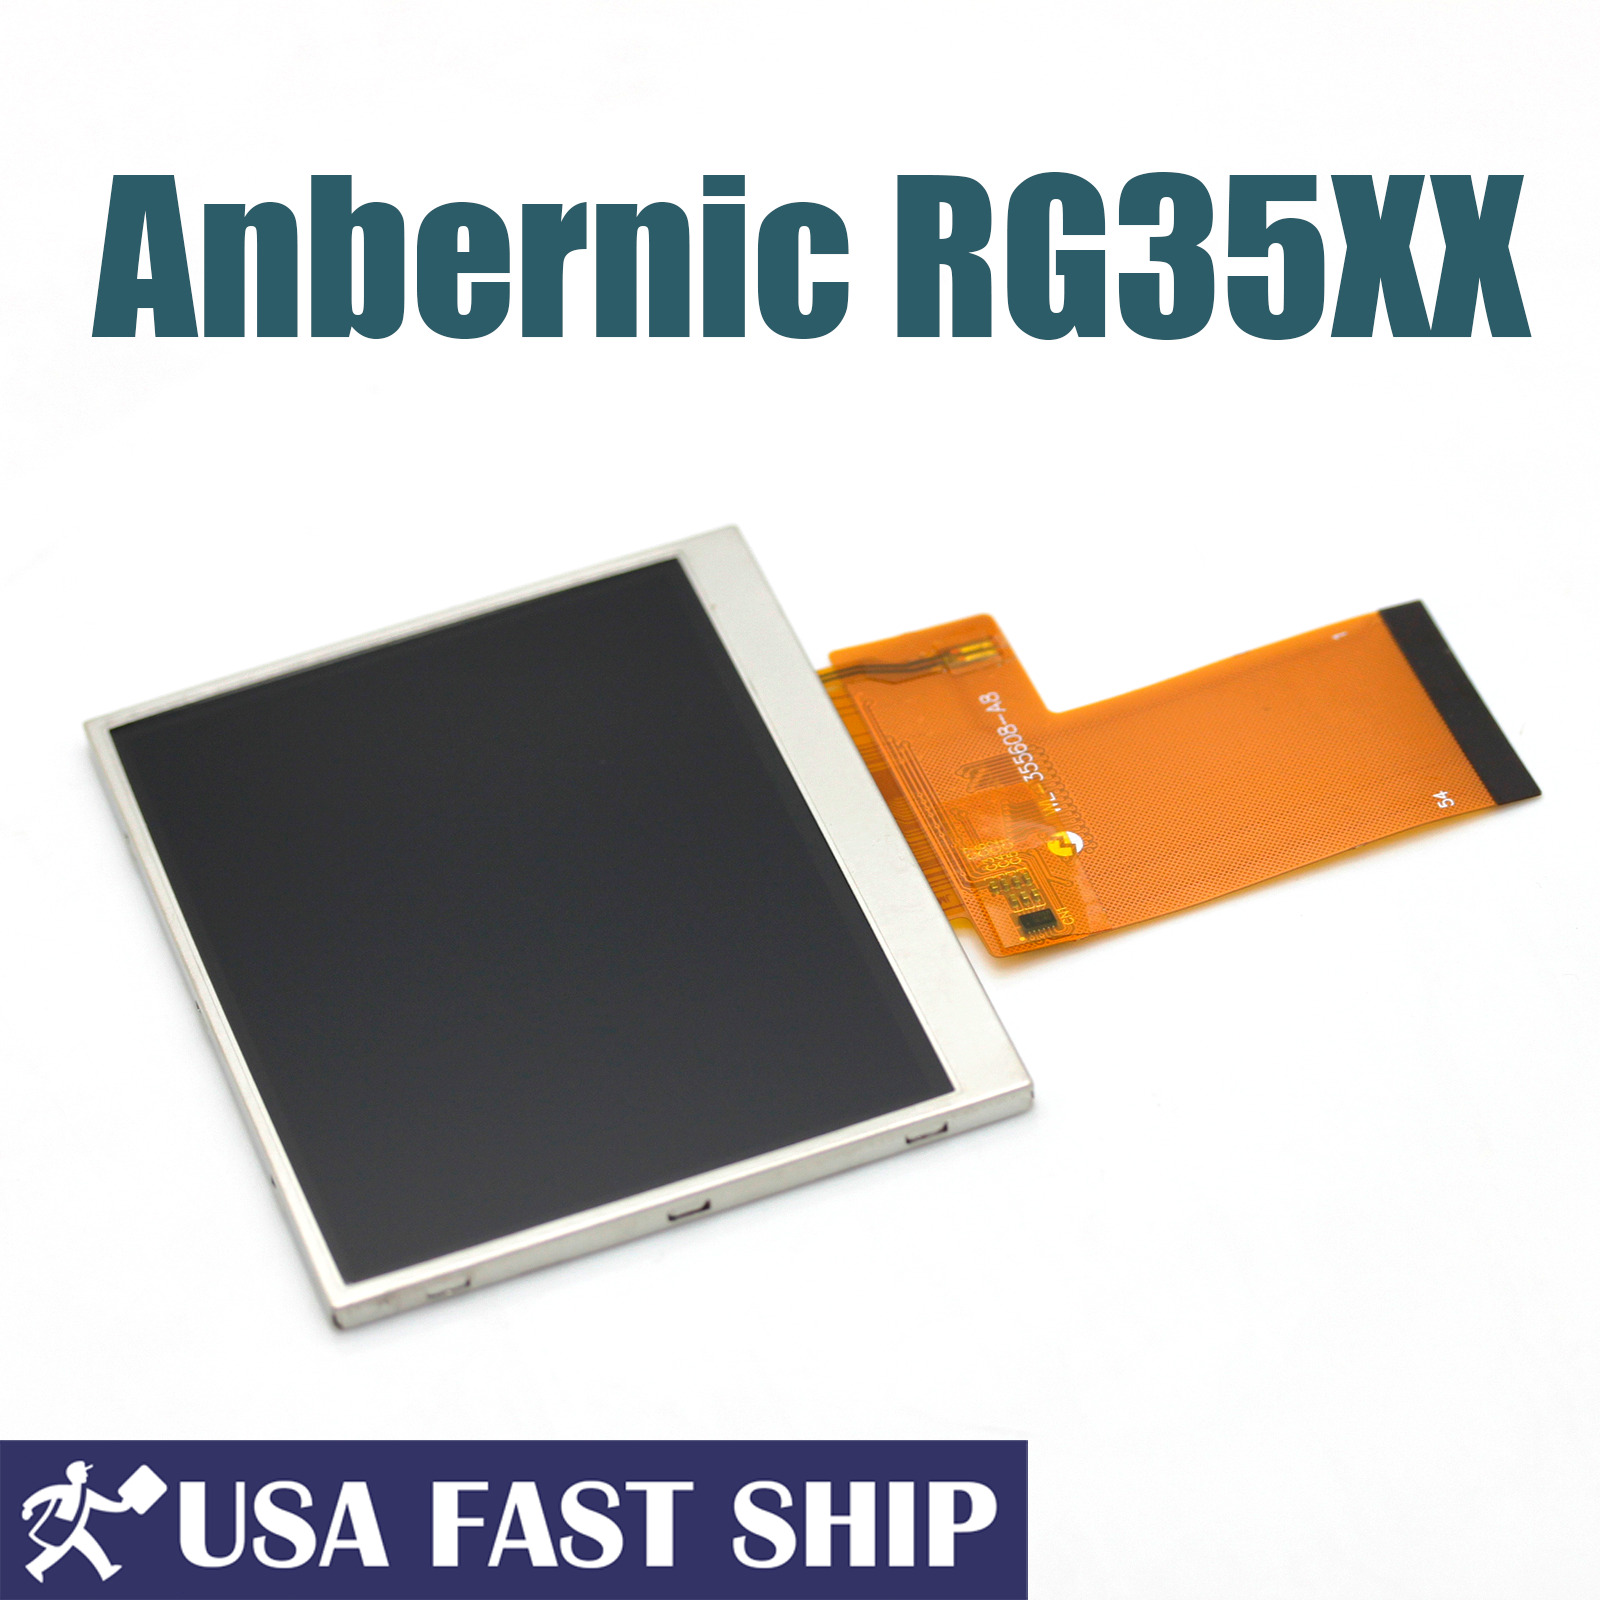 OEM 3.5 inch Display LCD Screen with Cable For Anbernic RG35XX - No Glass Cover